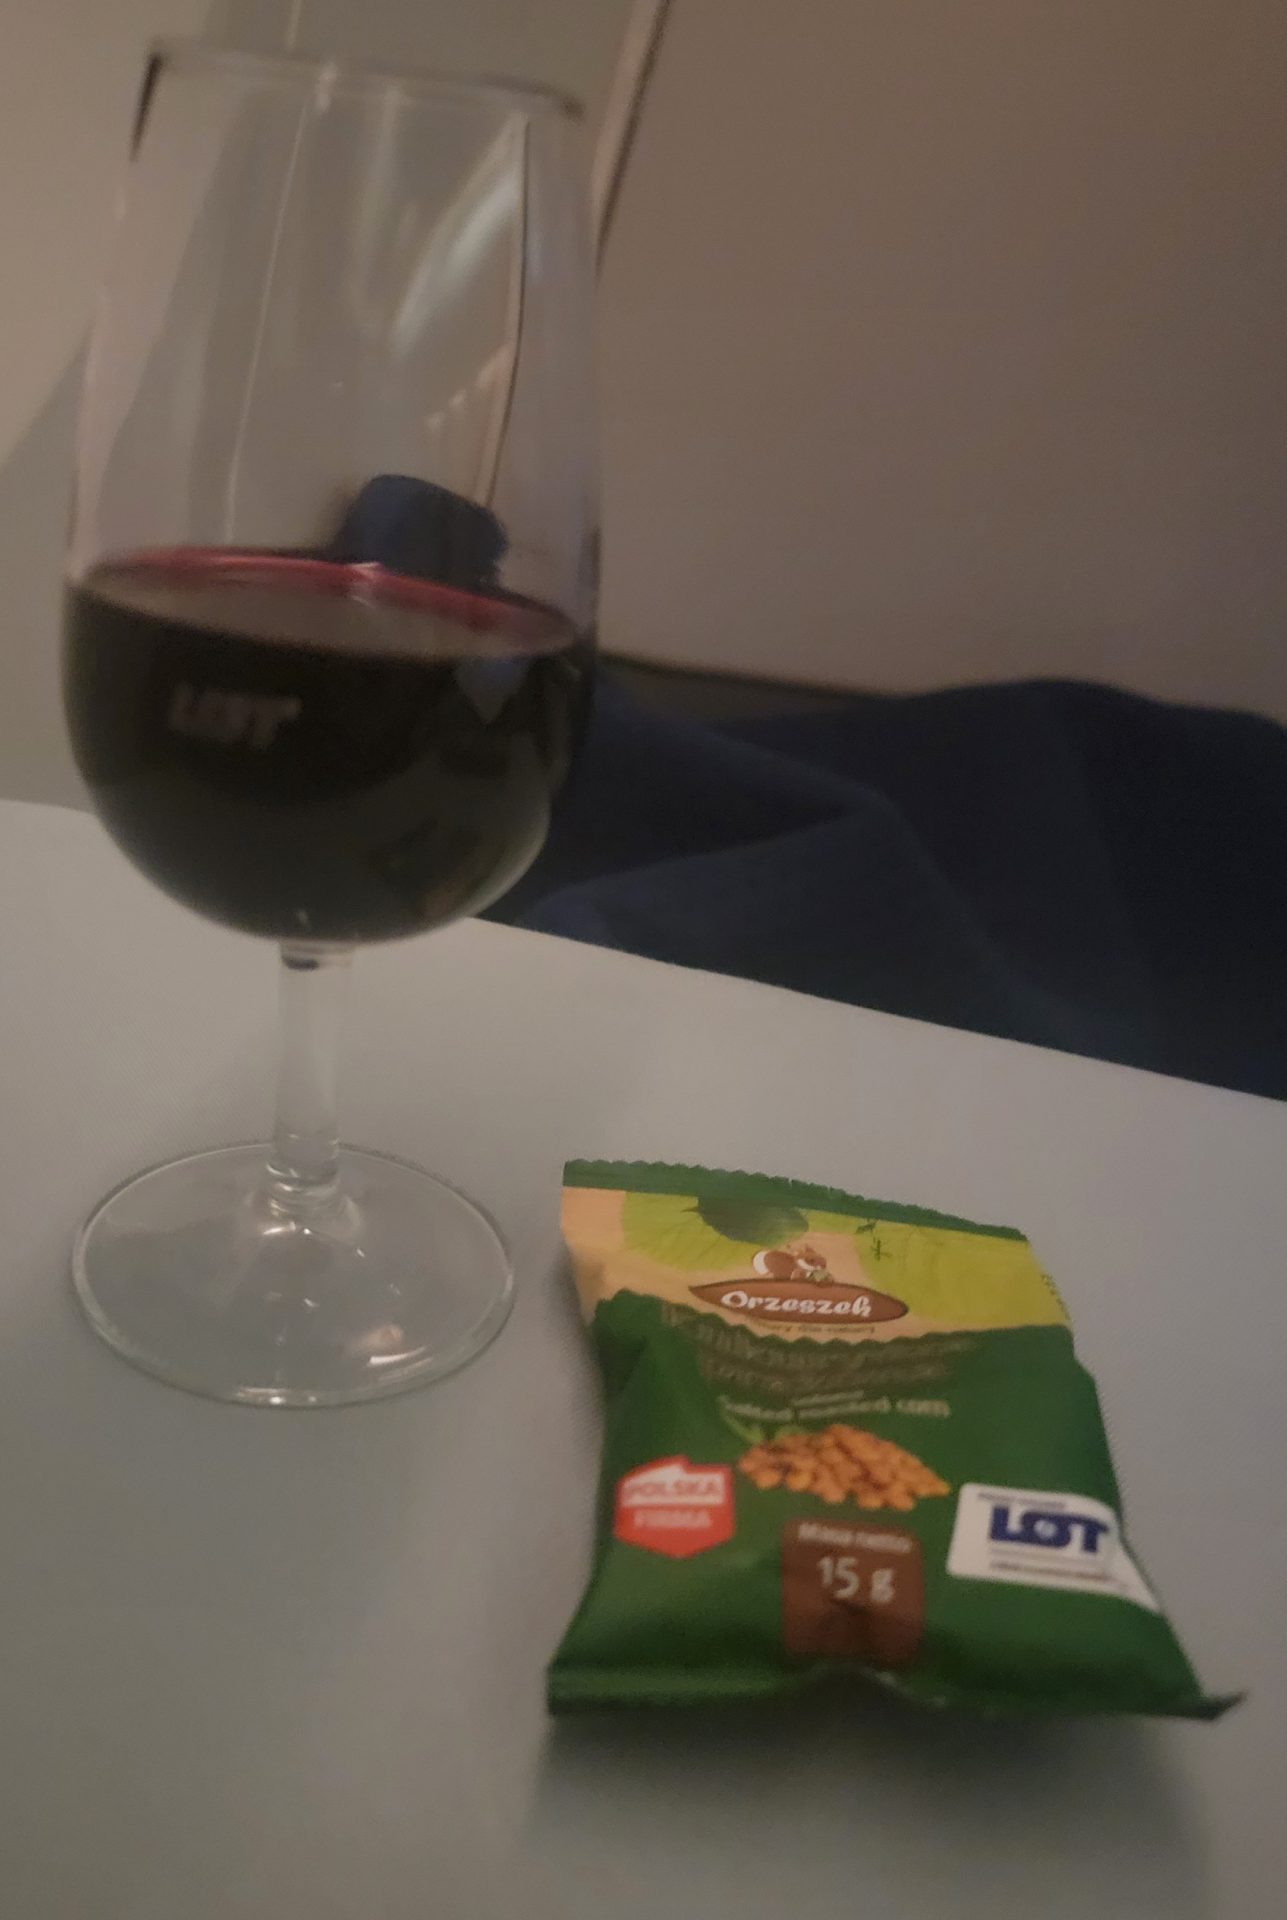 a glass of wine and a packet of snacks